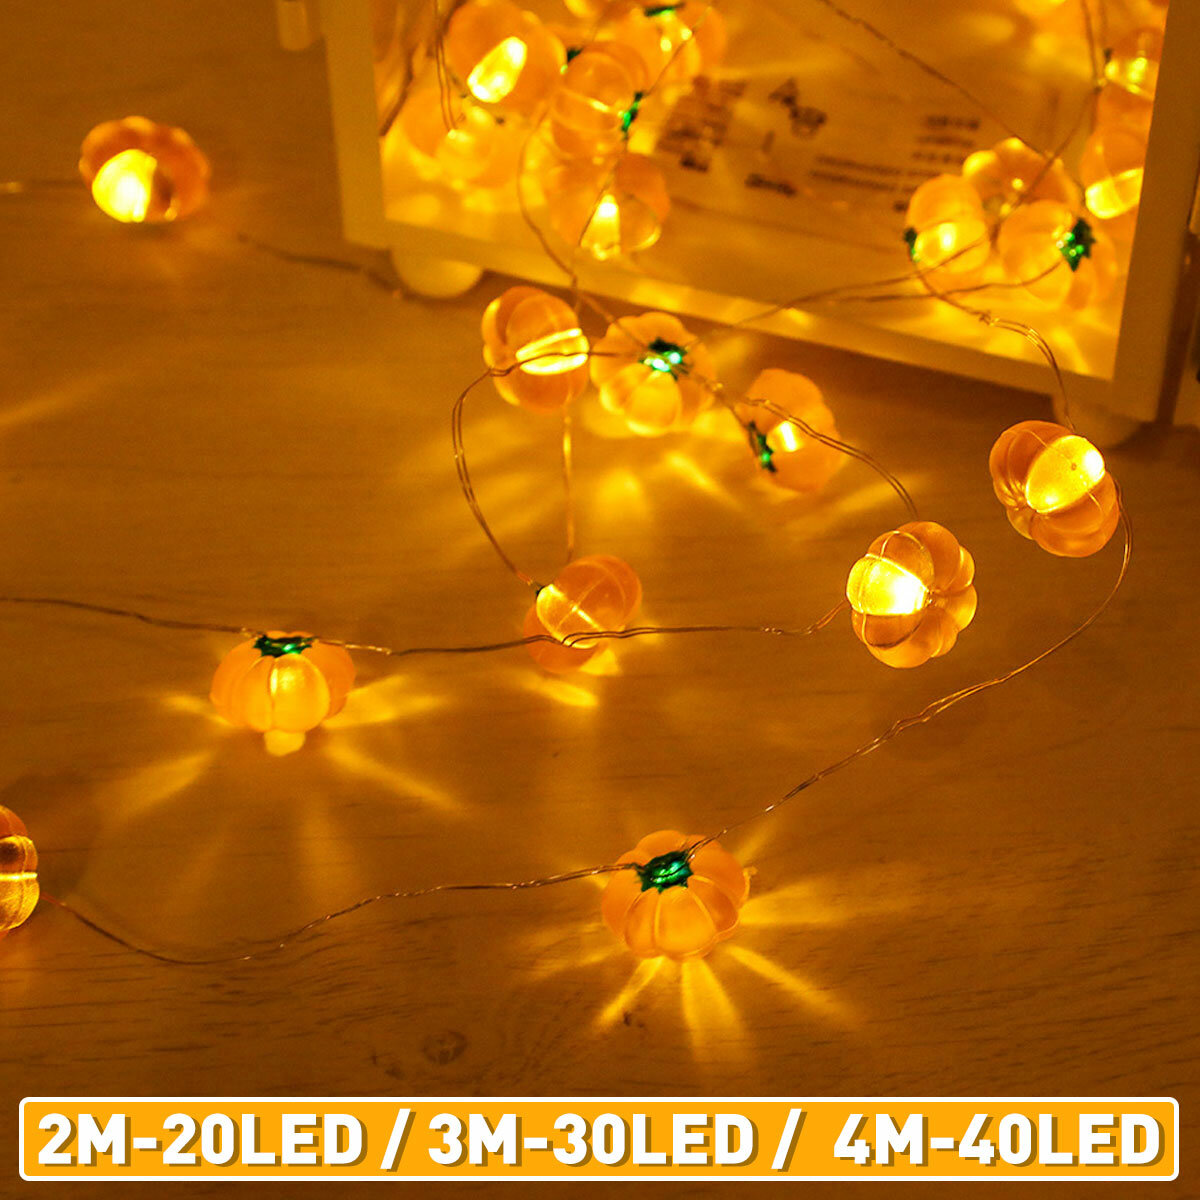 

2M/3M/4M LED Pumpkin String Light 8 Modes Waterproof Outdoor Party Holiday Fairy Lamp for Garden Home Decor